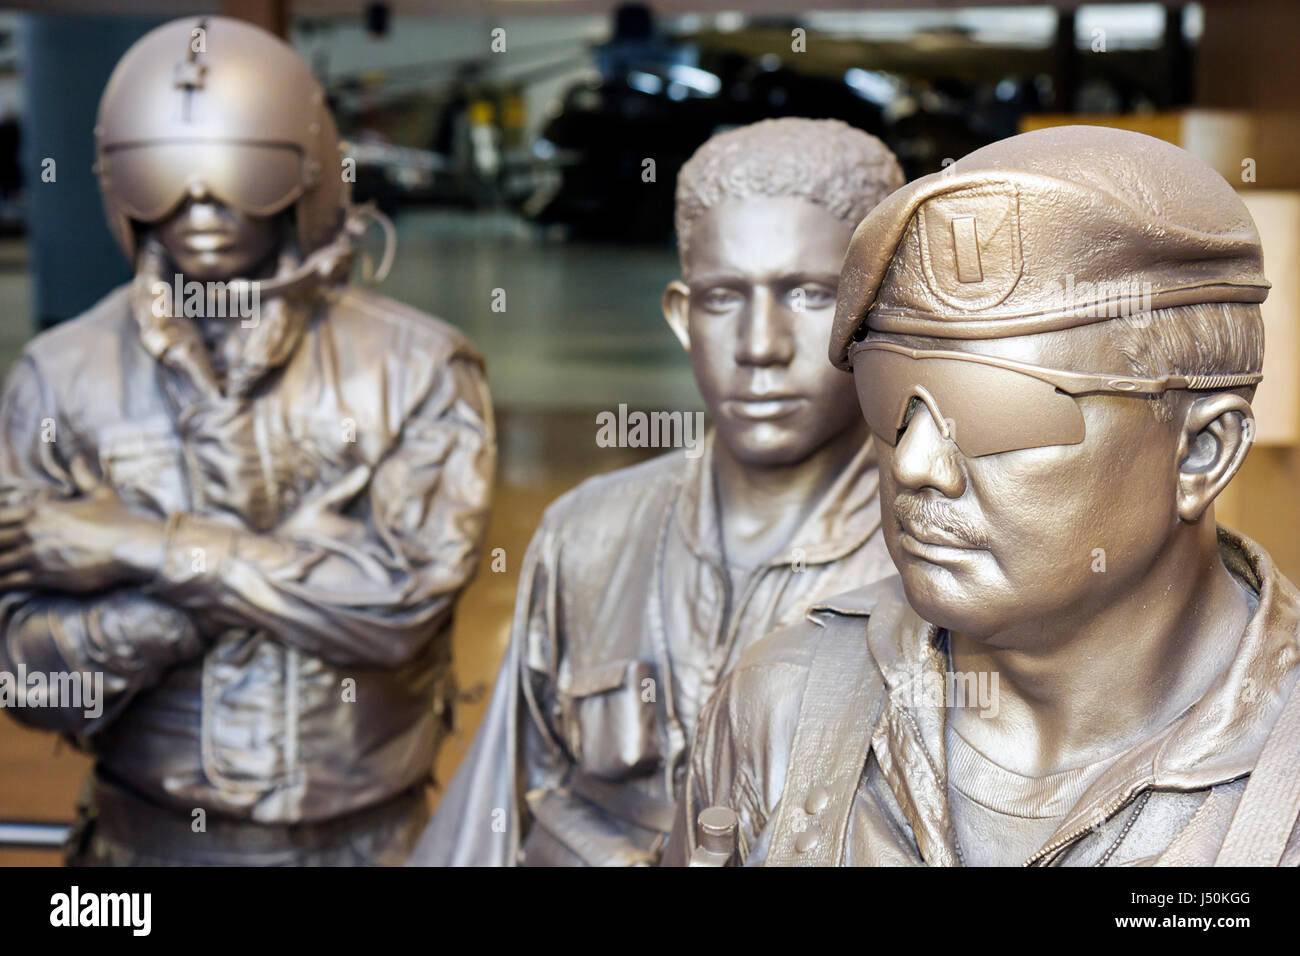 Alabama,Dale County,Ft. Fort Rucker,United States Army Aviation Museum,statue,pilots,soldiers,aircraft,military,exhibit exhibition collection defense, Stock Photo